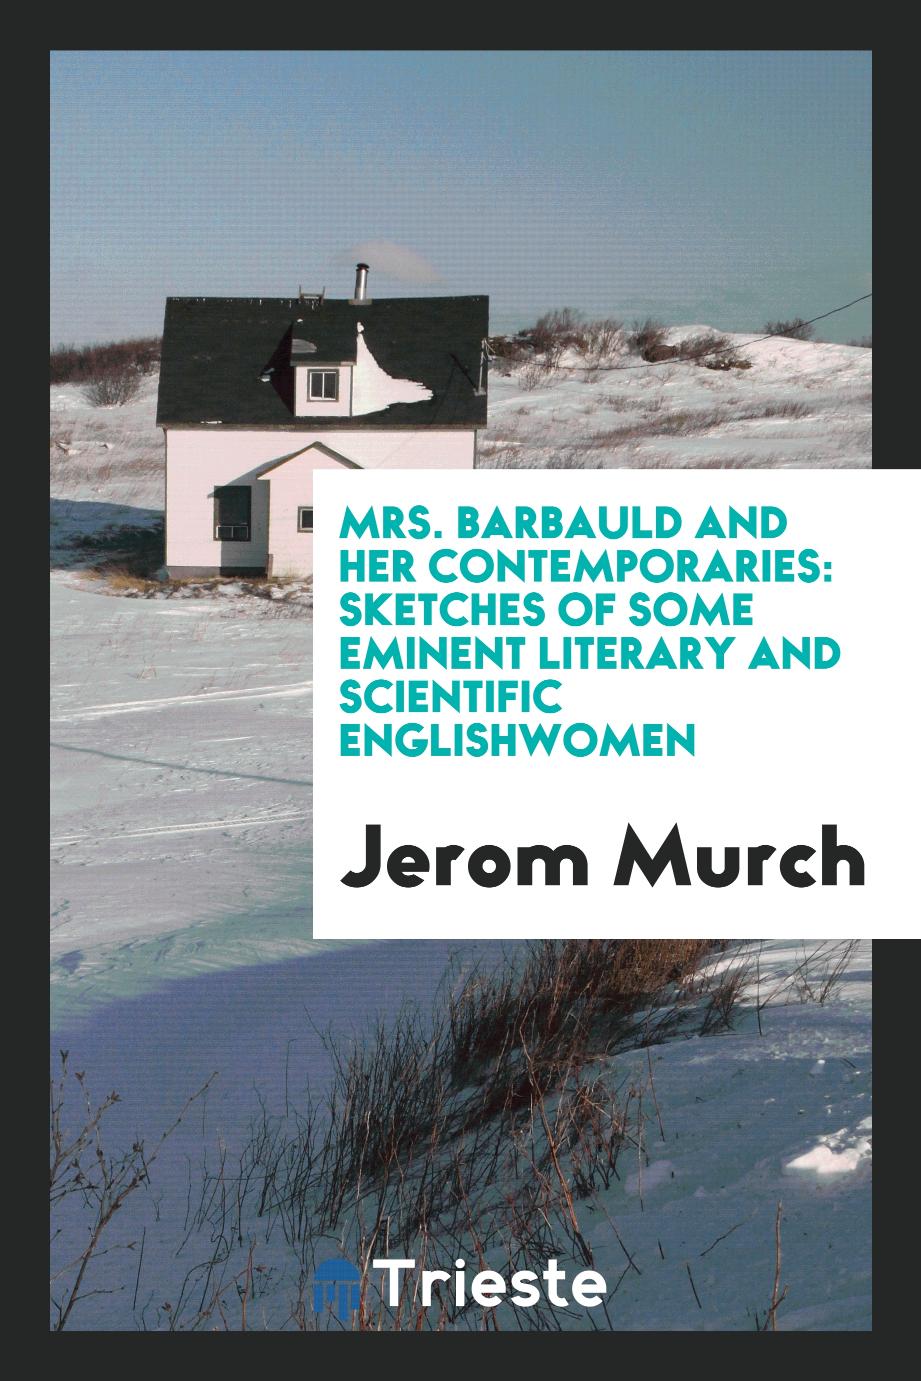 Mrs. Barbauld and Her Contemporaries: Sketches of Some Eminent Literary and Scientific Englishwomen